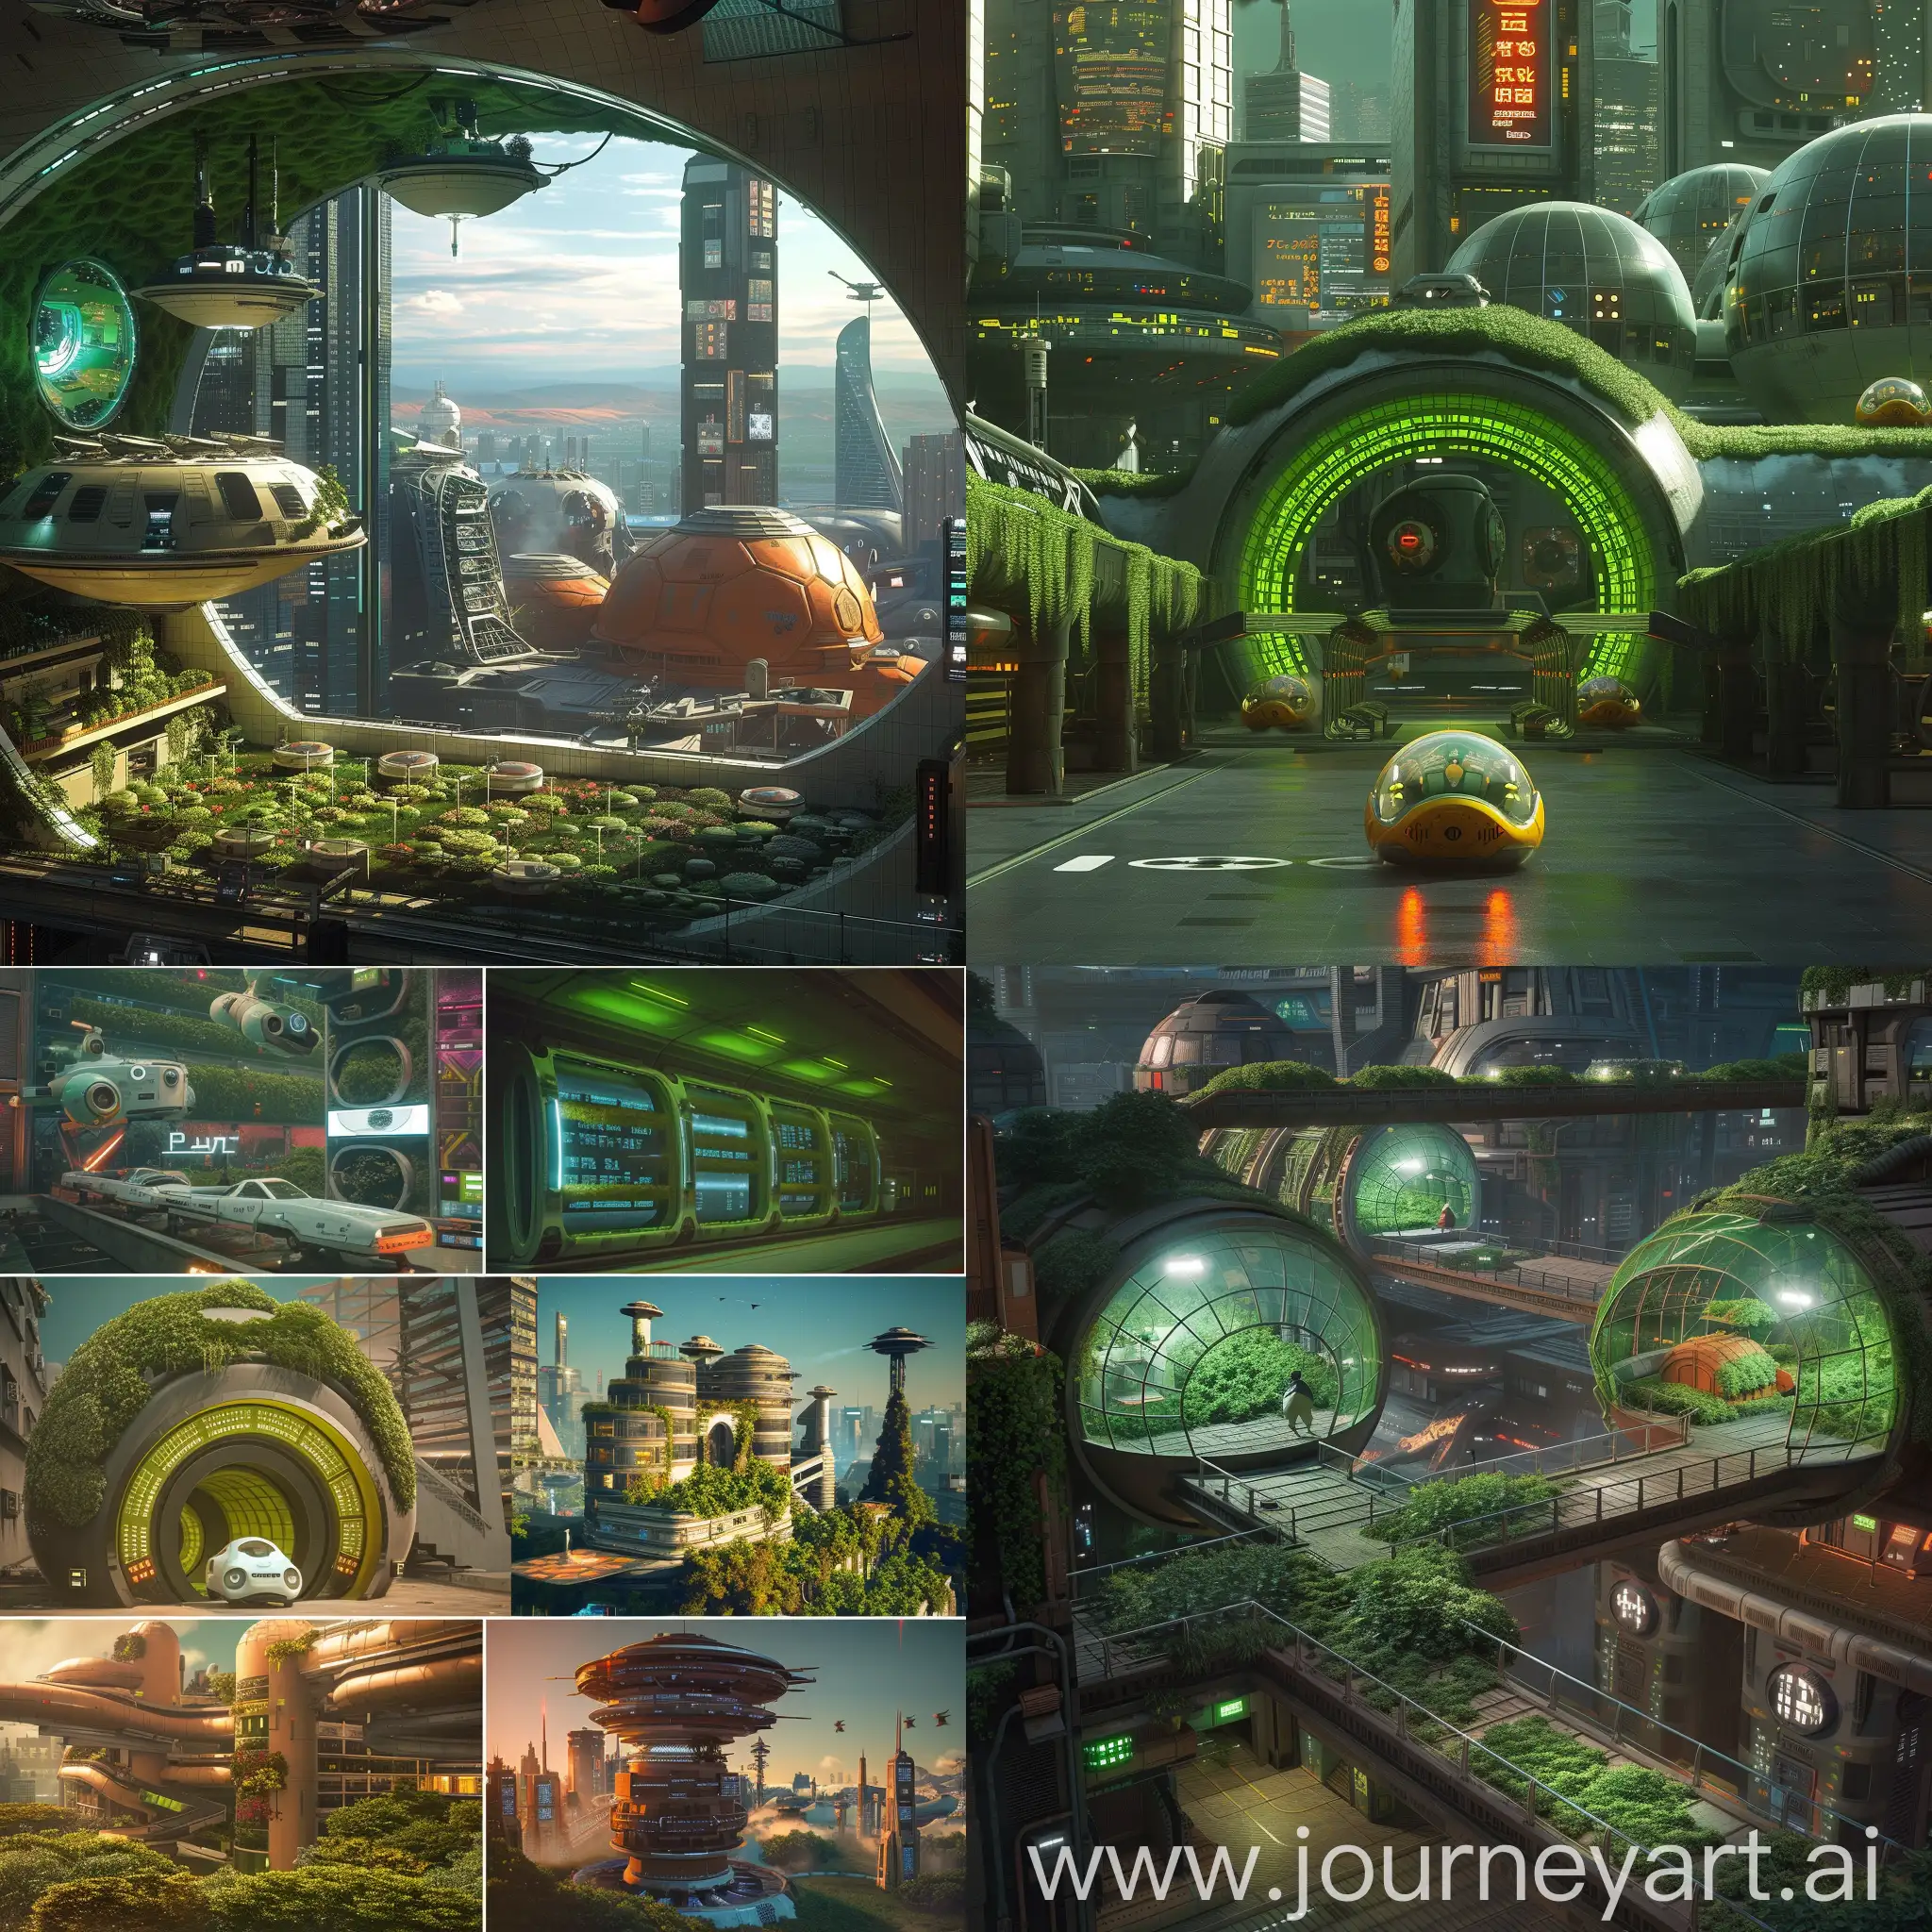 Futuristic Moscow, Metro 2033's Glowing Green Tunnels, Cyberpunk 2077's Vertical Gardens, Star Trek's Replicators, Bladerunner's Flying Cars (with a twist), A Wrinkle in Time's Tesseract Rooms, Doraemon's Pocket Technology, Spirited Away's Bathhouses as Public Spas, No Man's Sky's Bio-domes for Urban Farming, WALL-E's Waste Recycling Systems, Big Hero 6's Baymax-inspired Healthcare Pods, Horizon: Zero Dawn's Cauldron-inspired Biodomes, Elysium's Space Elevators, Overwatch's Eco-Friendly Skyscrapers, Hayao Miyazaki films' Sky Gardens, Star Wars' Holographic Advertisements, Akira's Hyper-speed Transportation Systems, The Jetsons' Flying Taxis, Neon Genesis Evangelion's Force Field Barriers, Neon Genesis Evangelion's Force Field Barriers, The Expanse's Belter Underground Habitats, unreal engine 5 --stylize 1000